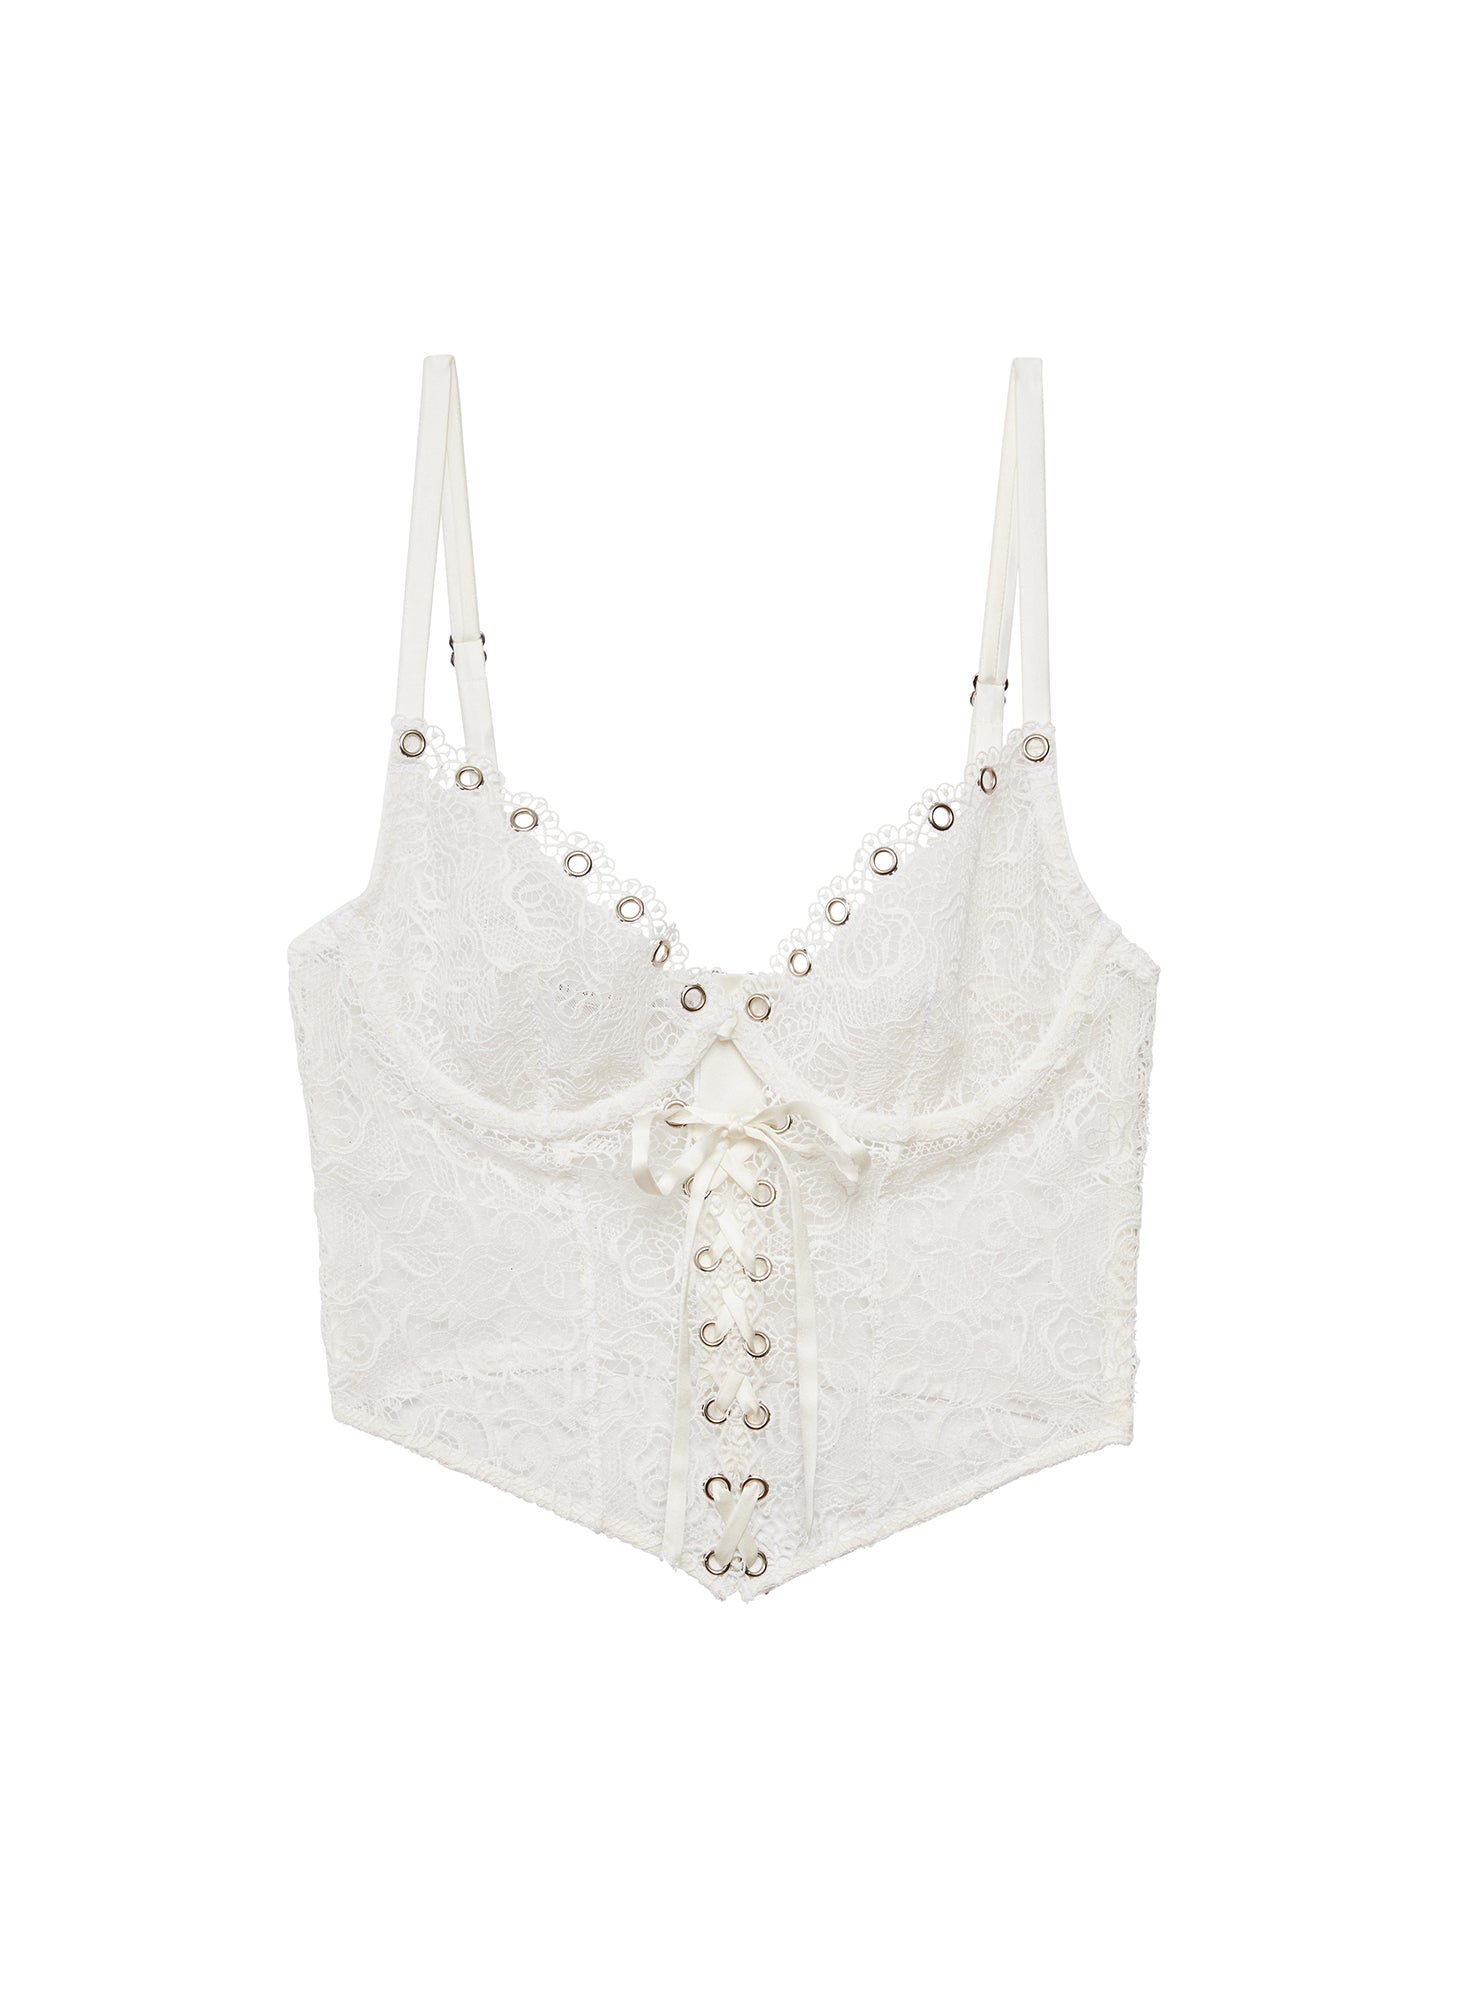 Eyelet Embroidery Lace Up Bustier | Fleur du Mal